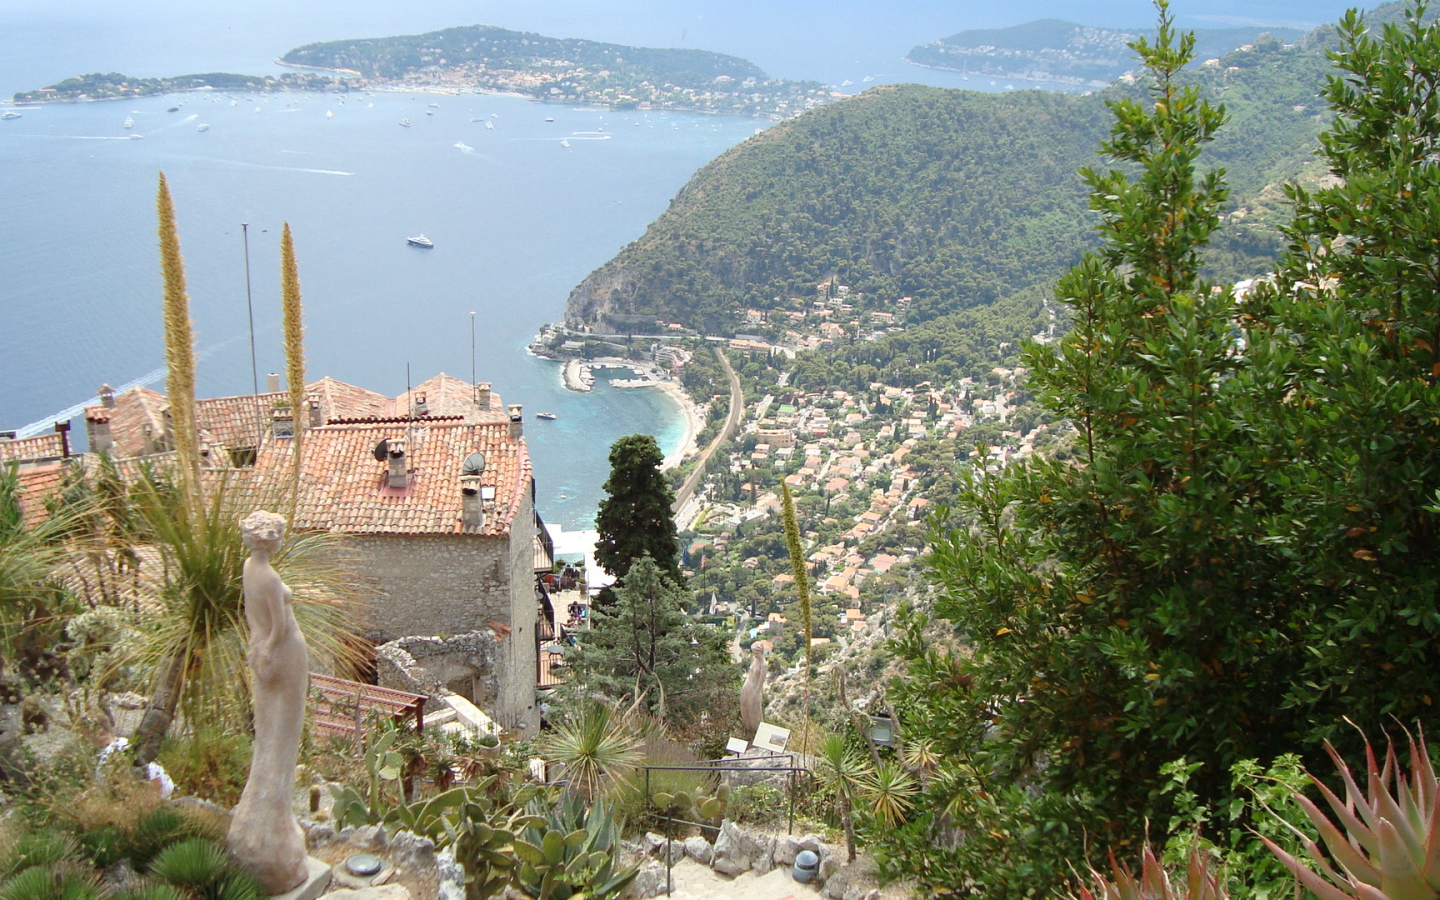 View of the bay in the resort Eze, France